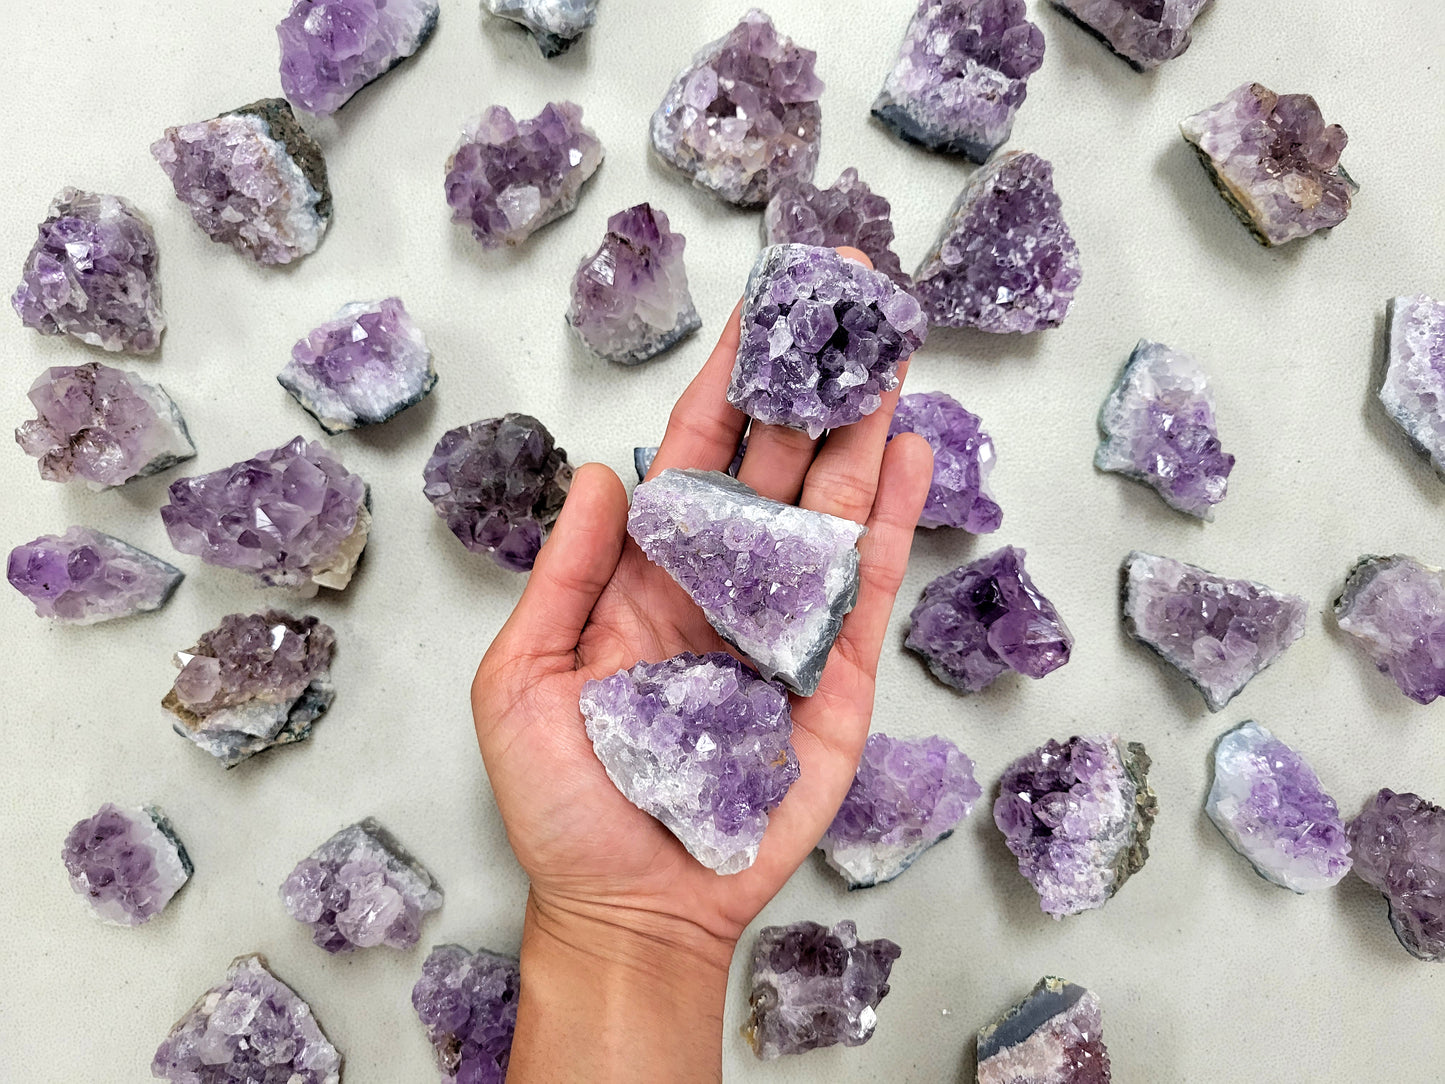 Mini Amethyst Clusters From Brazil